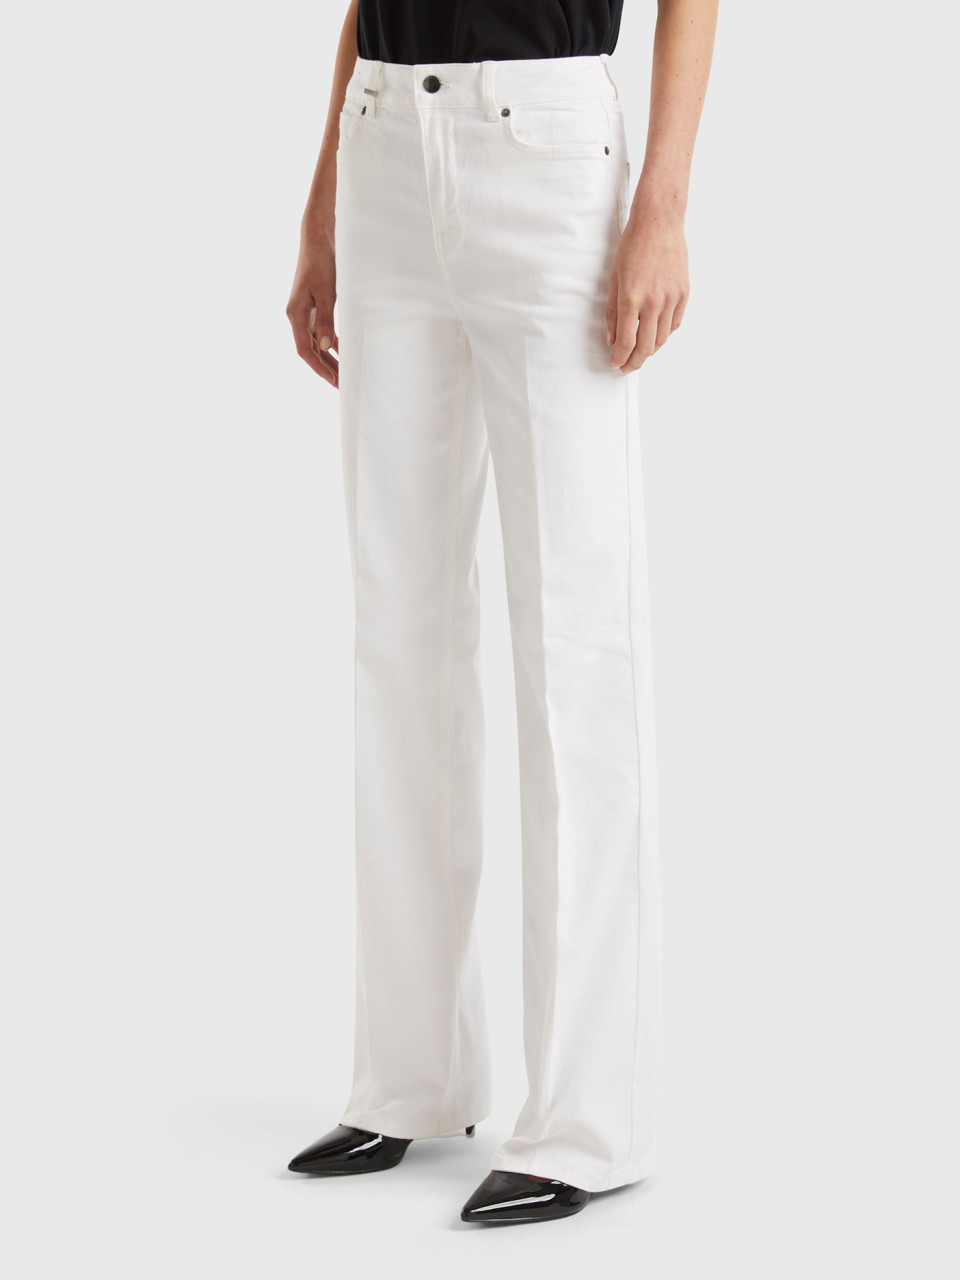 Benetton, Jeans Flare Stretch, Bianco, Donna